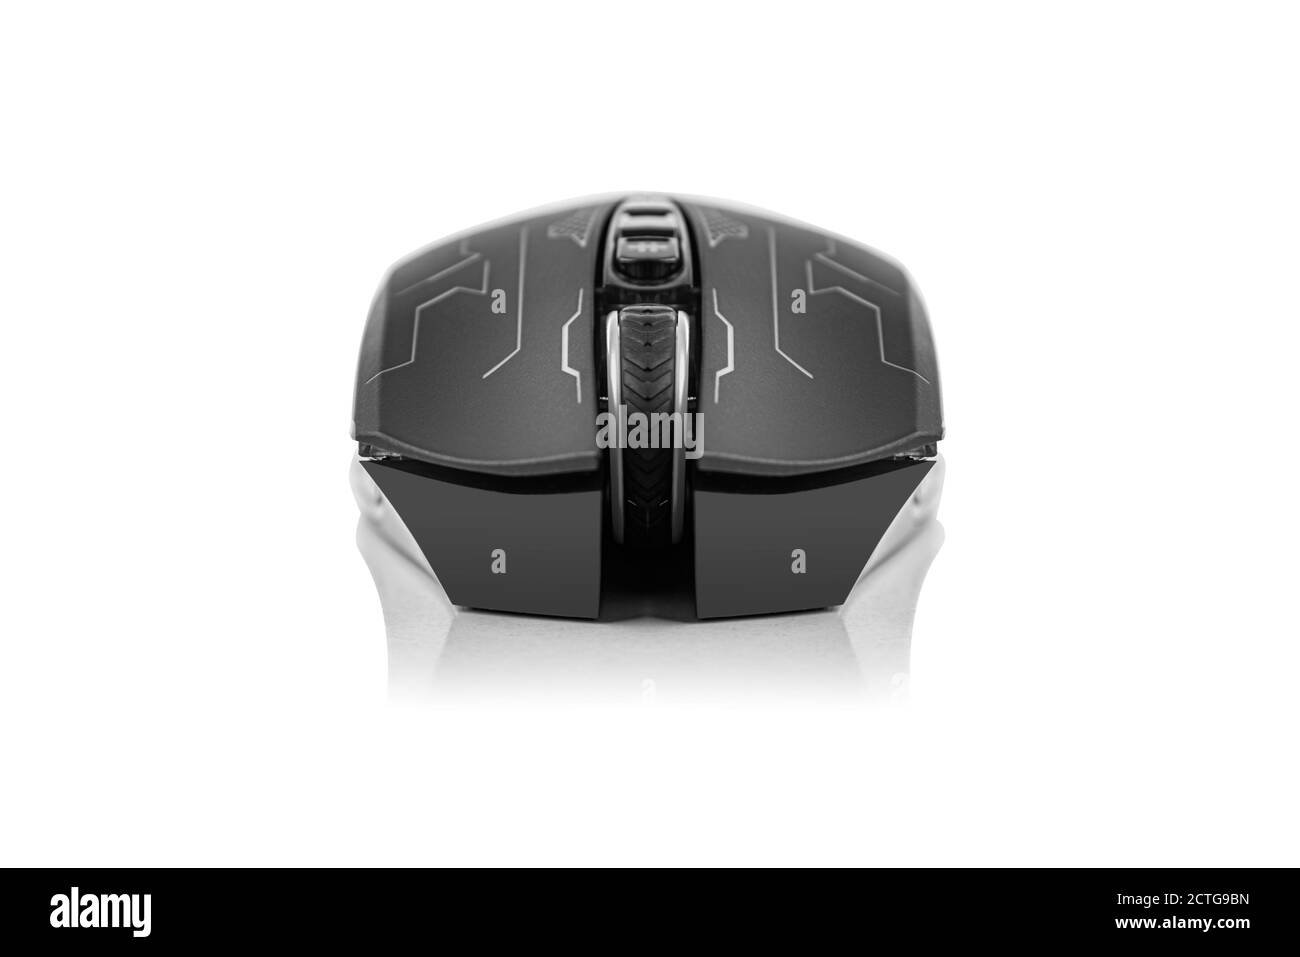 Computer mouse isolated on white background. Stock Photo